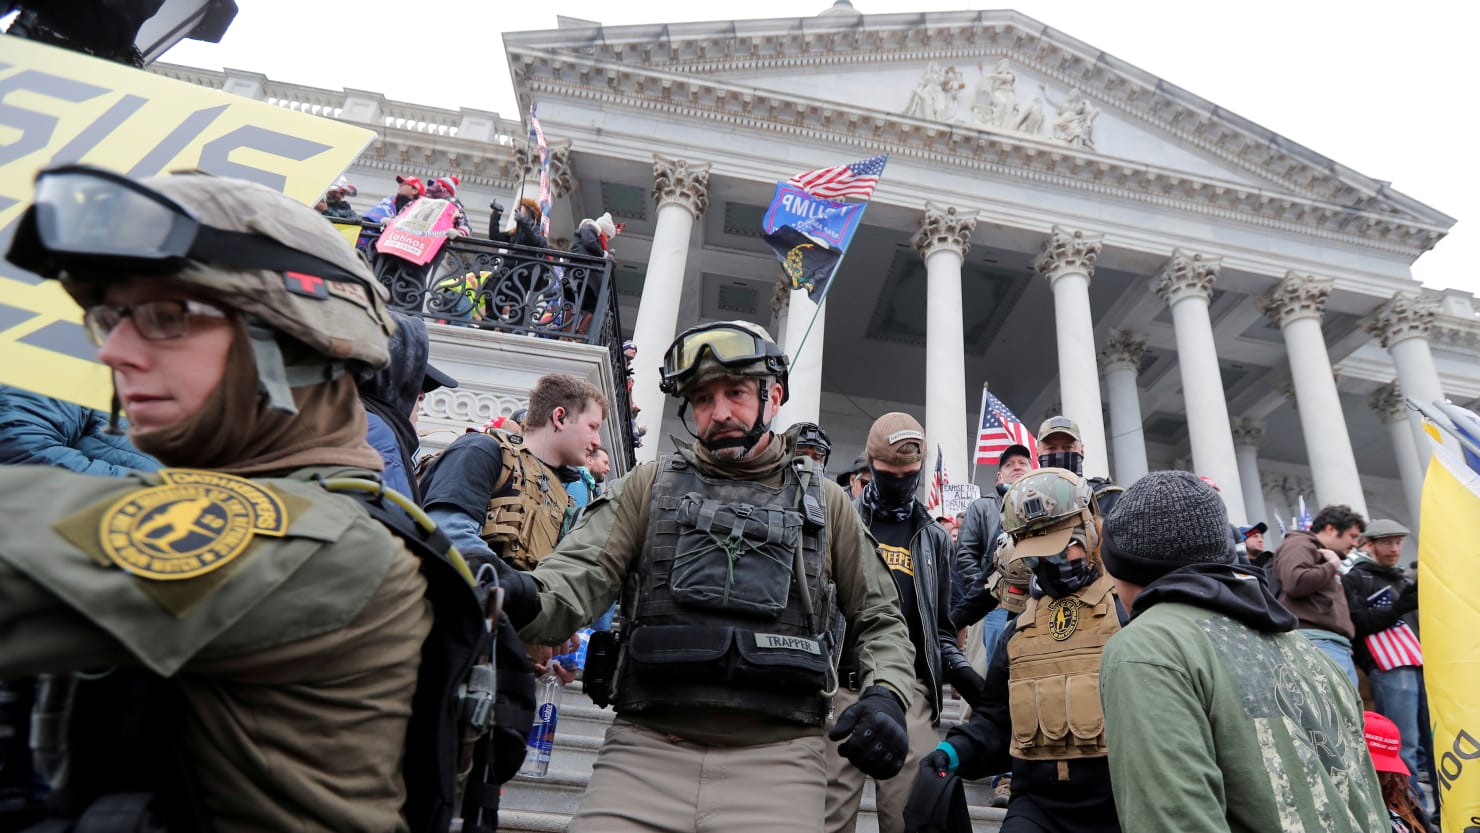 The Department of Justice opens the door to the search for new domestic terrorist powers after the Capitol riot